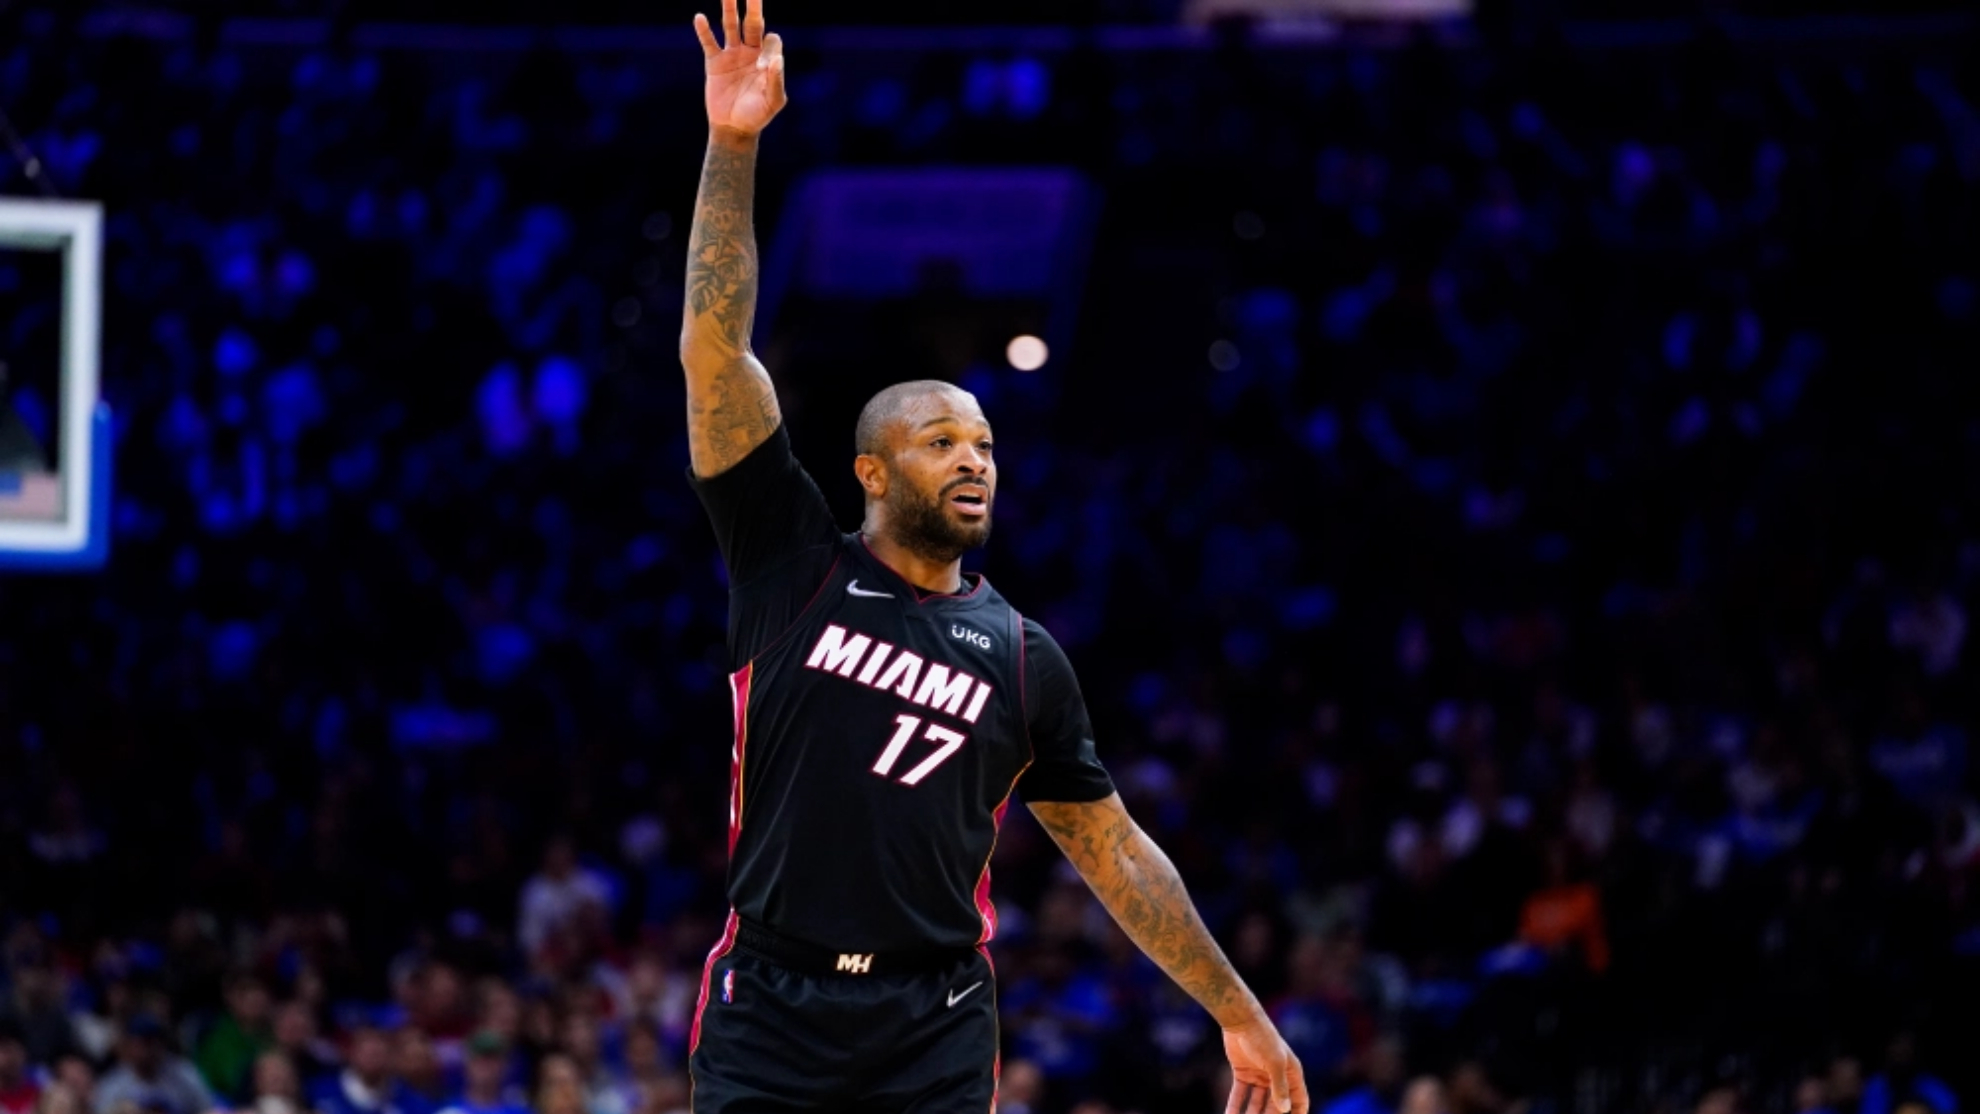 Report: P.J. Tucker's signing with the 76ers is 'likely' to be investigated by the NBA